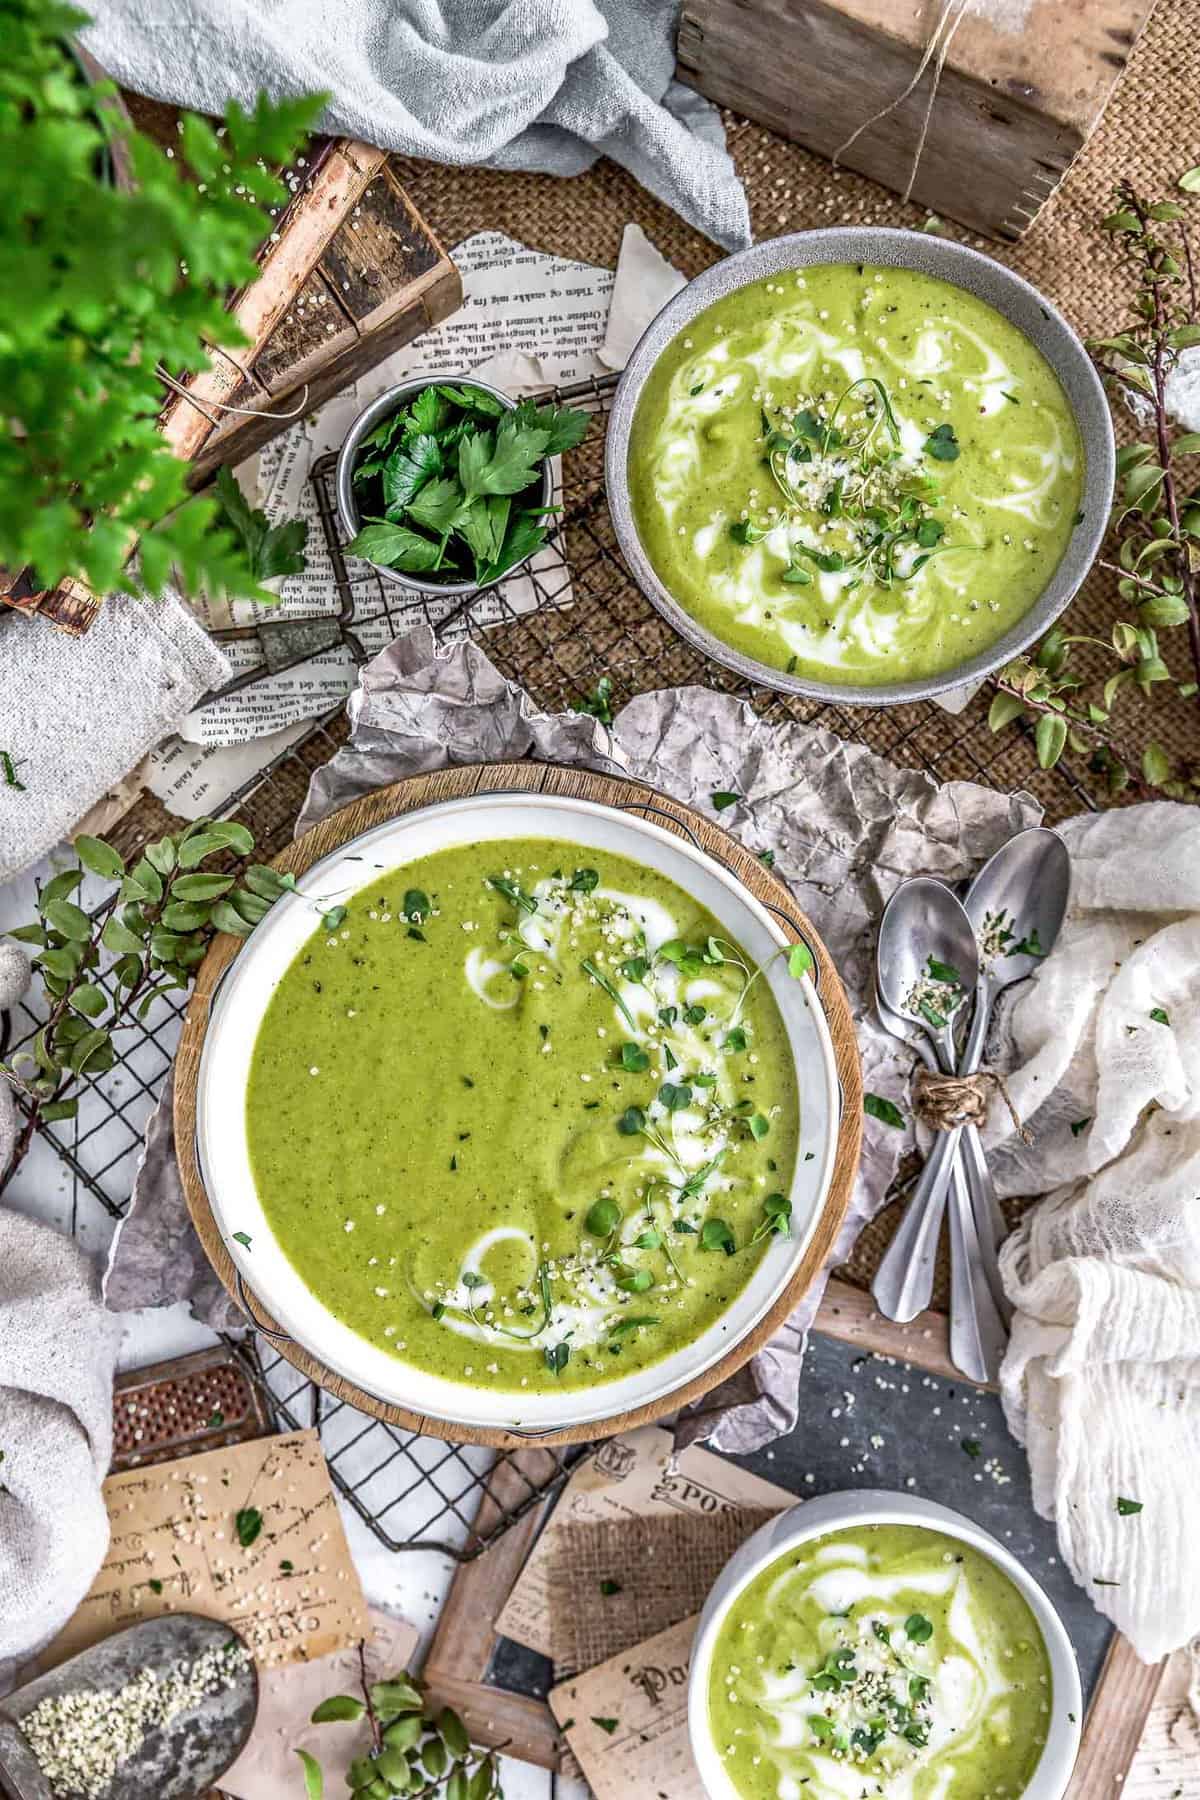 Tablescape of Healing Green Soup